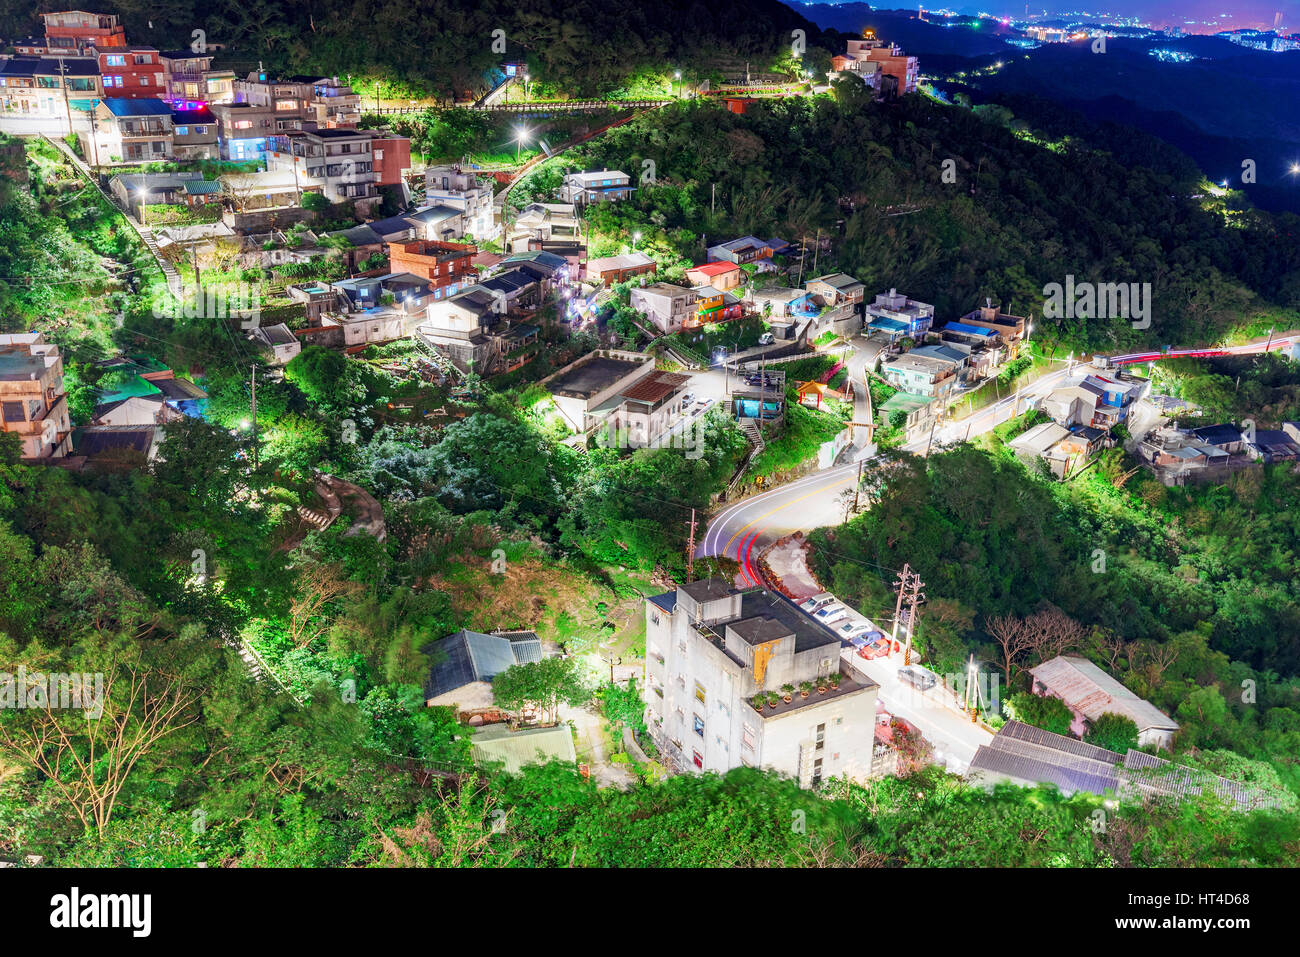 View of Jiufen town and nature at night Stock Photo